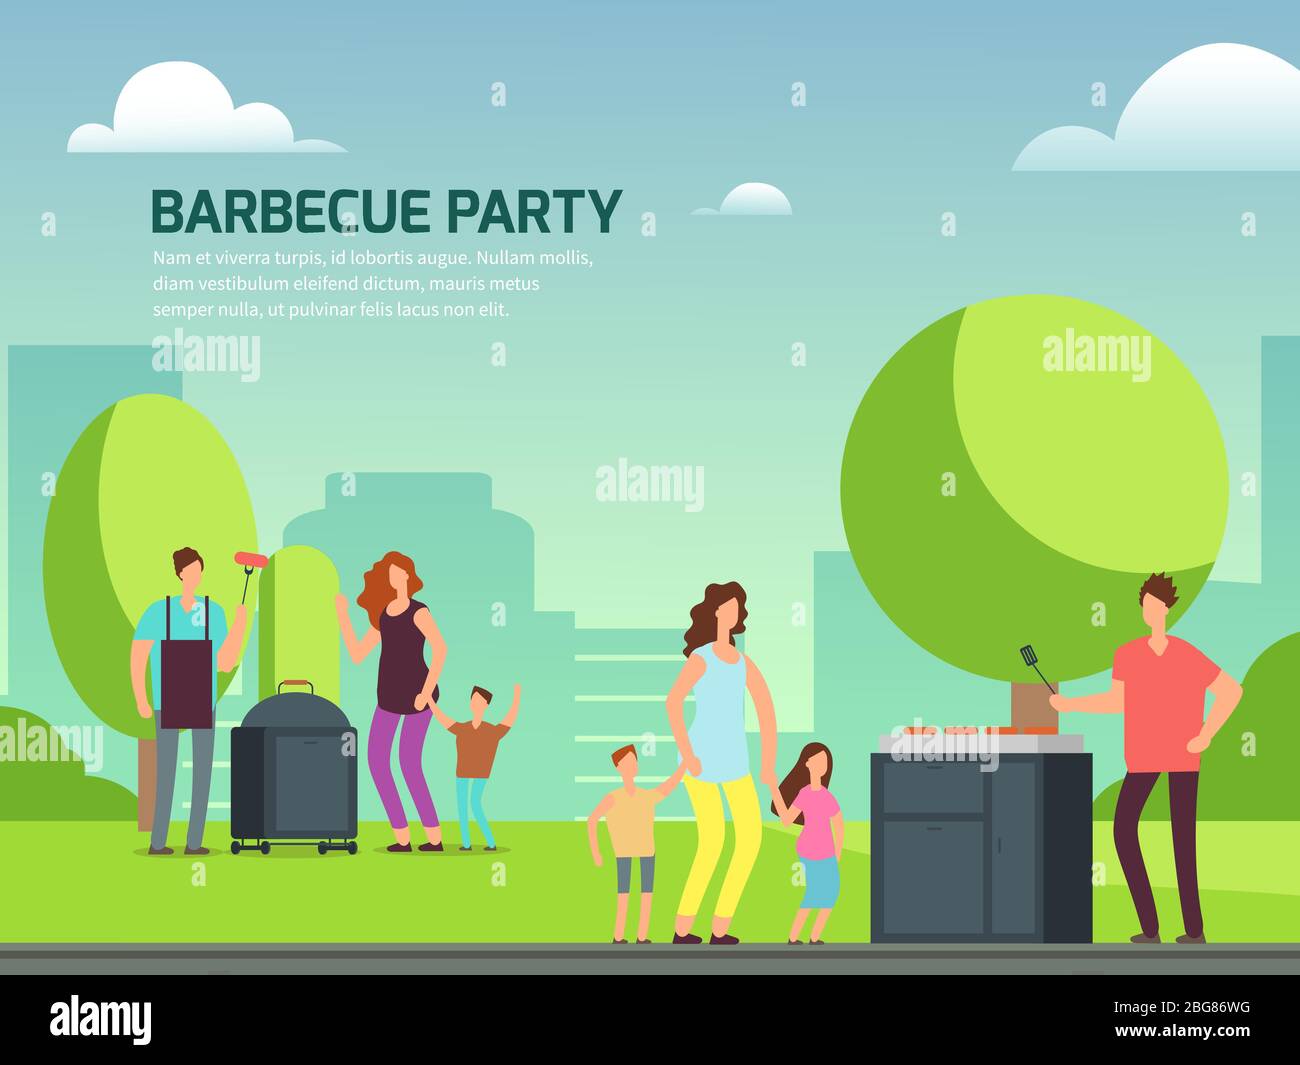 Barbeque party banner design. Cartoon character families in park vector illustration Stock Vector